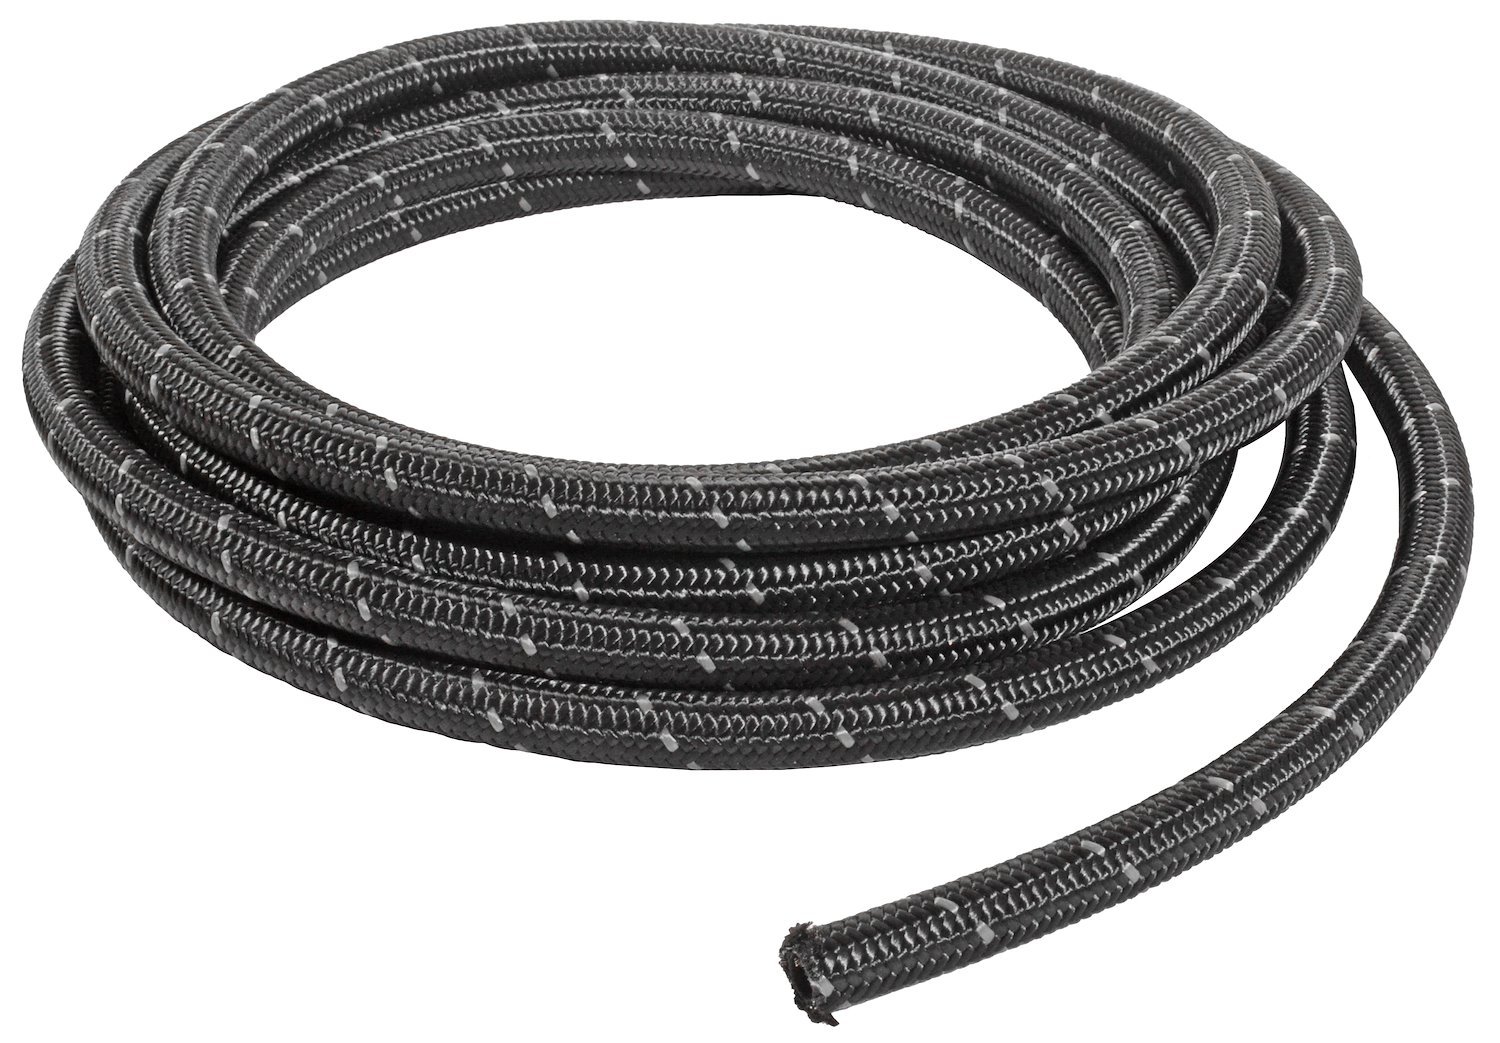 JEGS Fuel Hose - Pro-Flo Extreme 30R9 Braided Hose -8AN x 20 ft. - JEGS